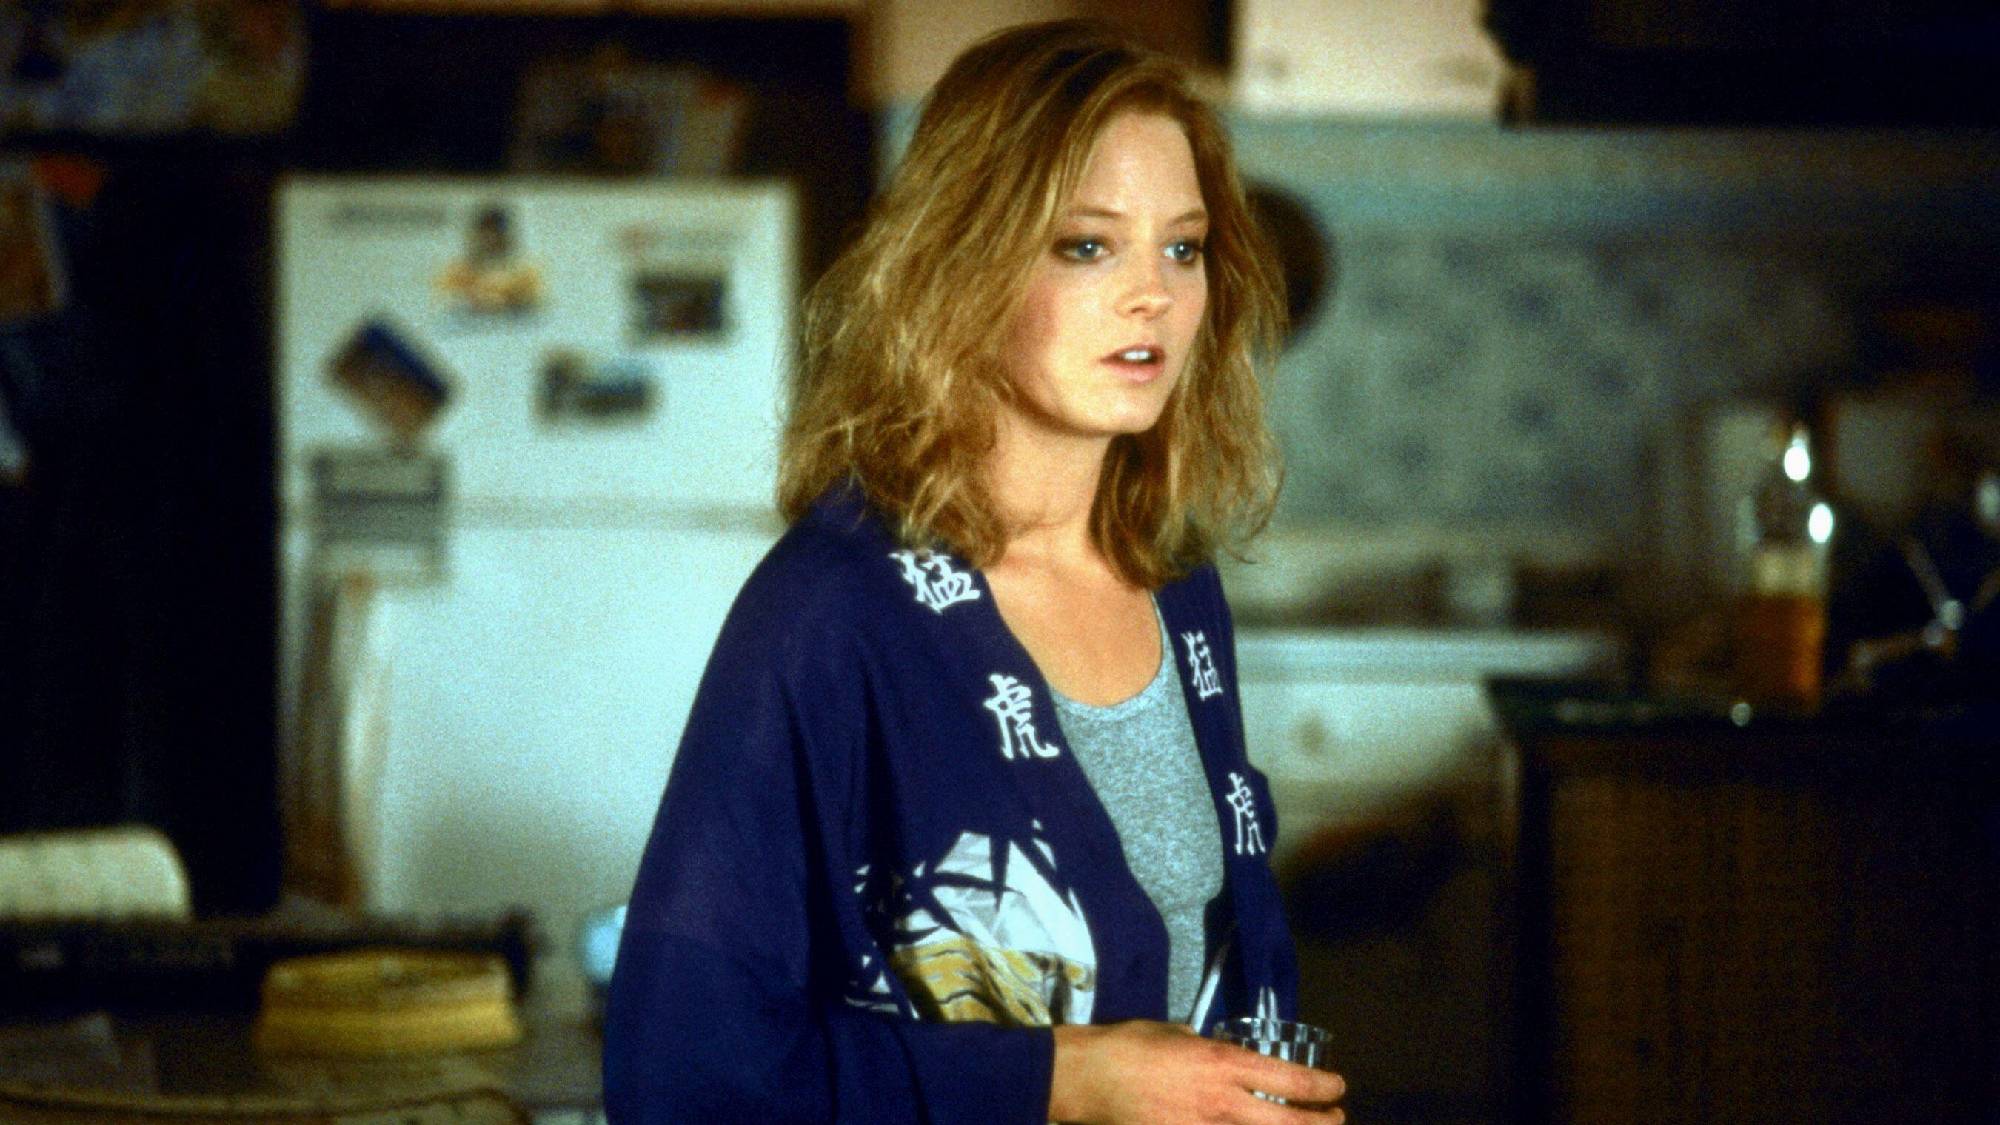 Jodie Foster as Sarah Tobias in The Accused